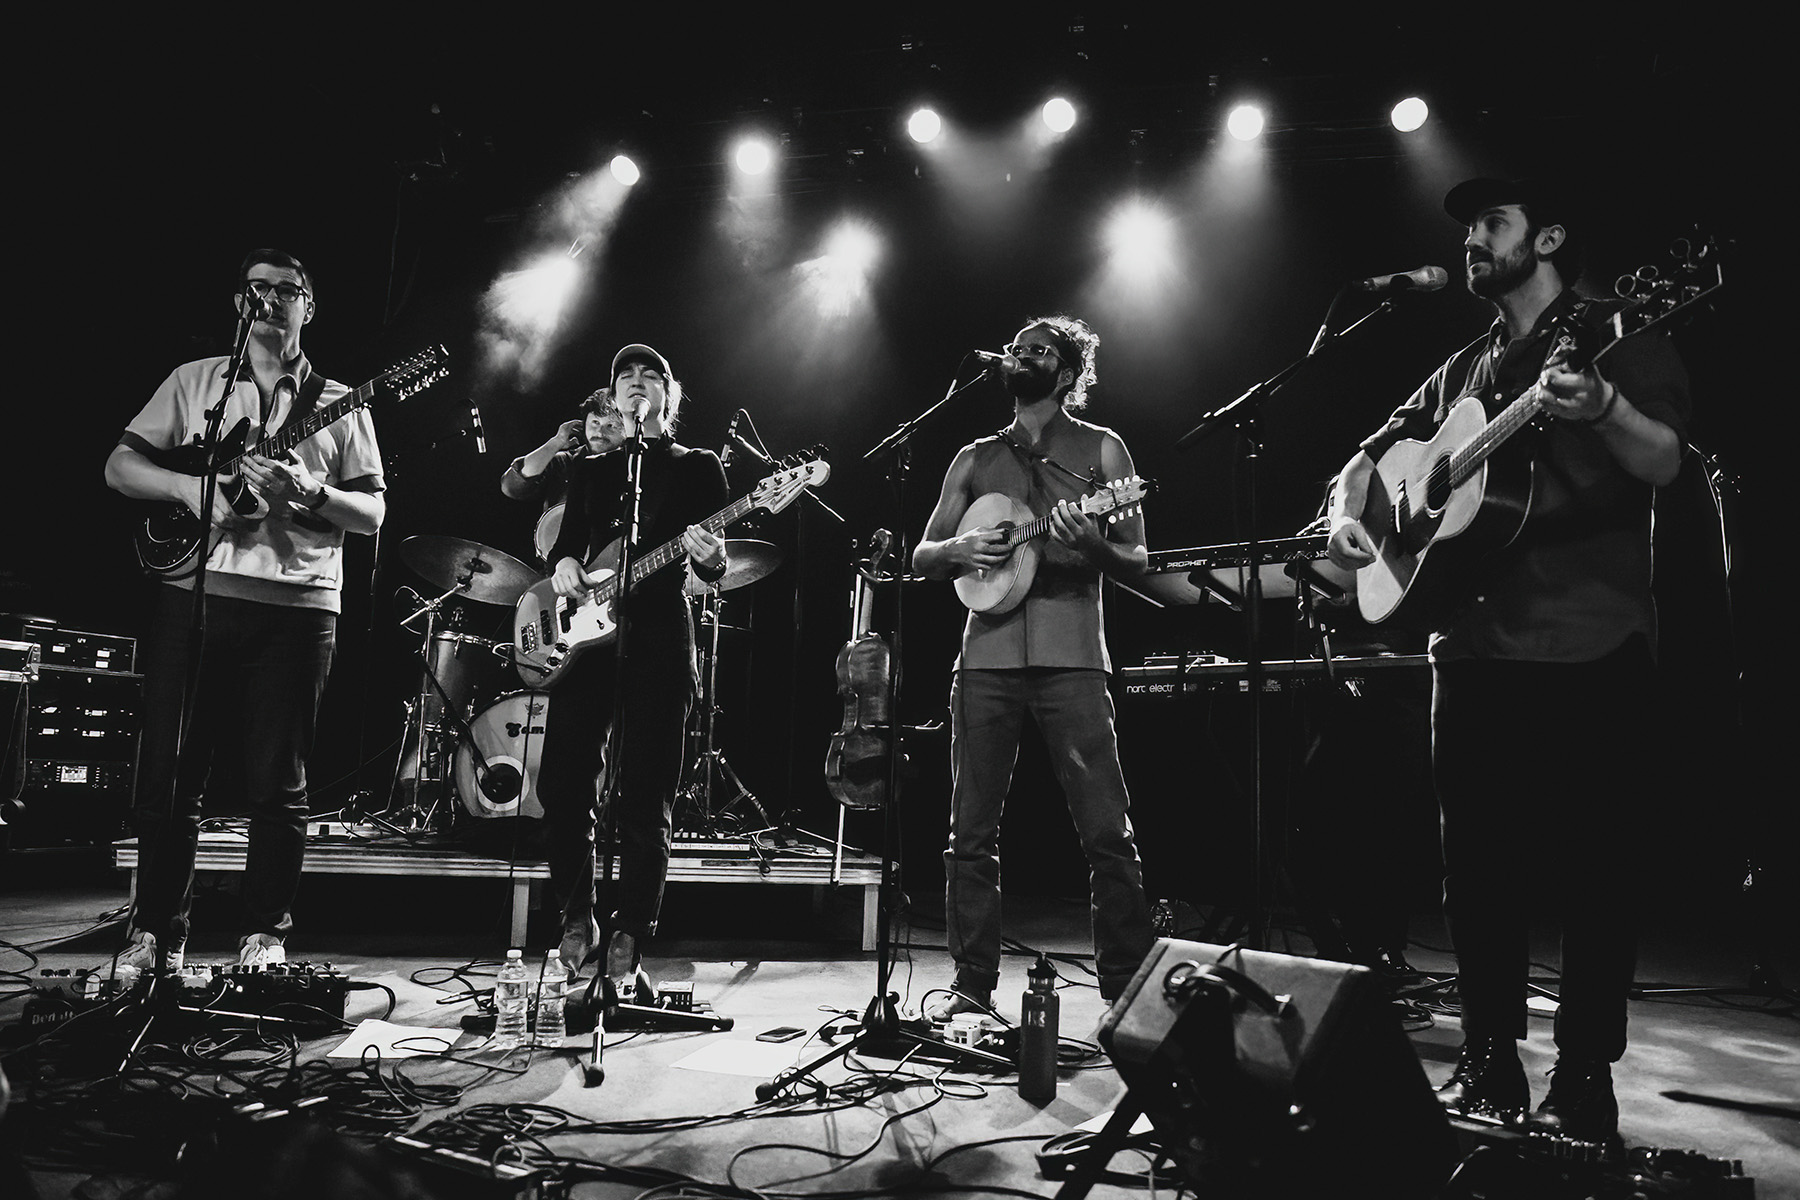 Photos | Darlingside + Field Guide @ The Sinclair